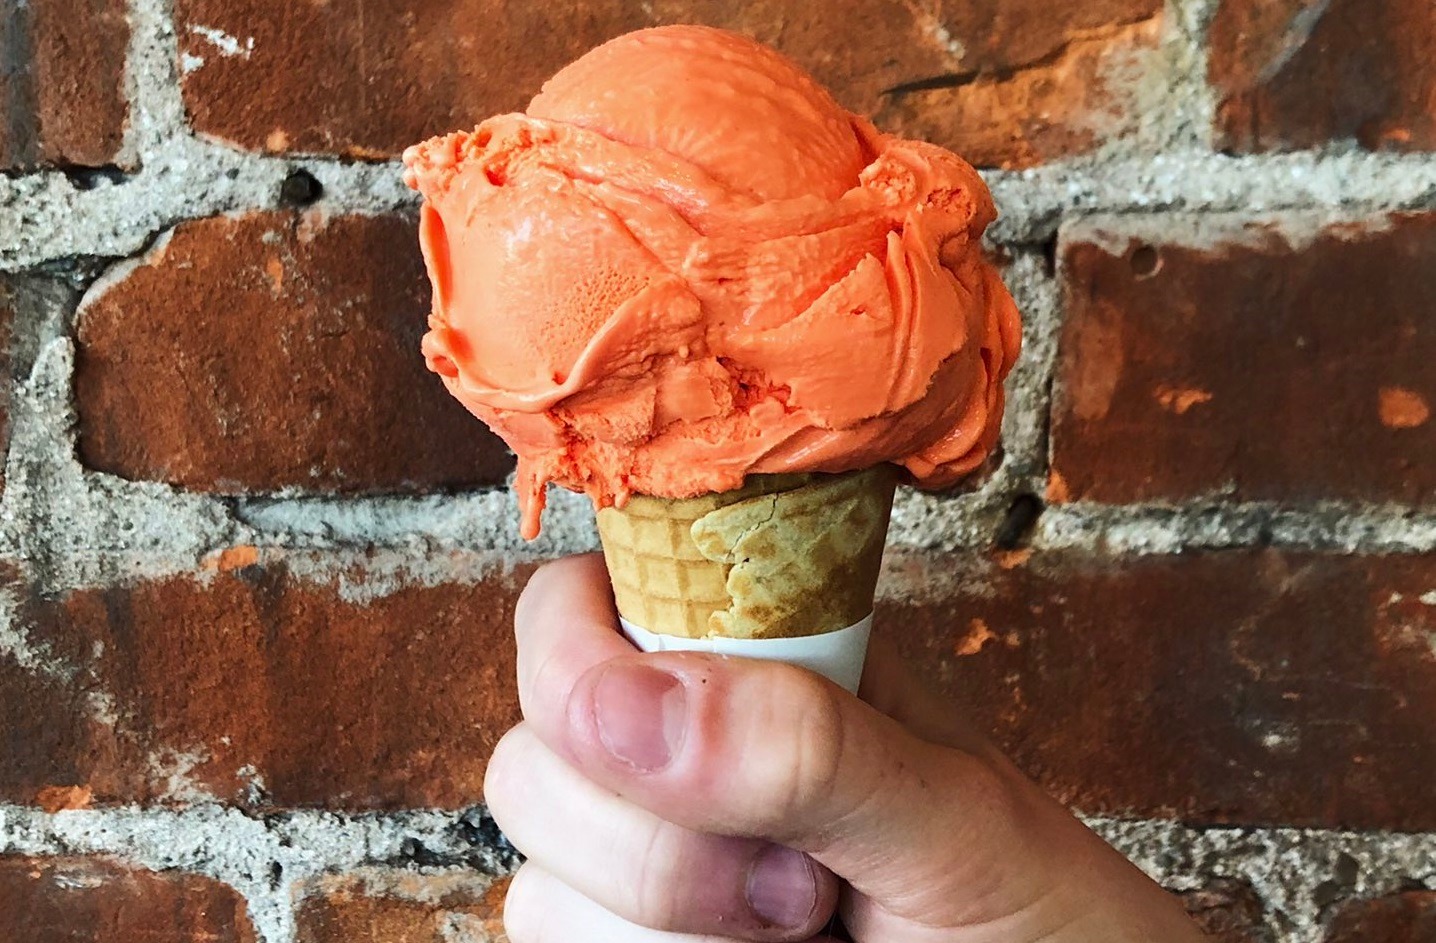 🍦 It’s Time to Vote “Yay” Or “Nay” On These Unusual Ice Cream Flavors Buffalo Wing Sauce Ice Cream